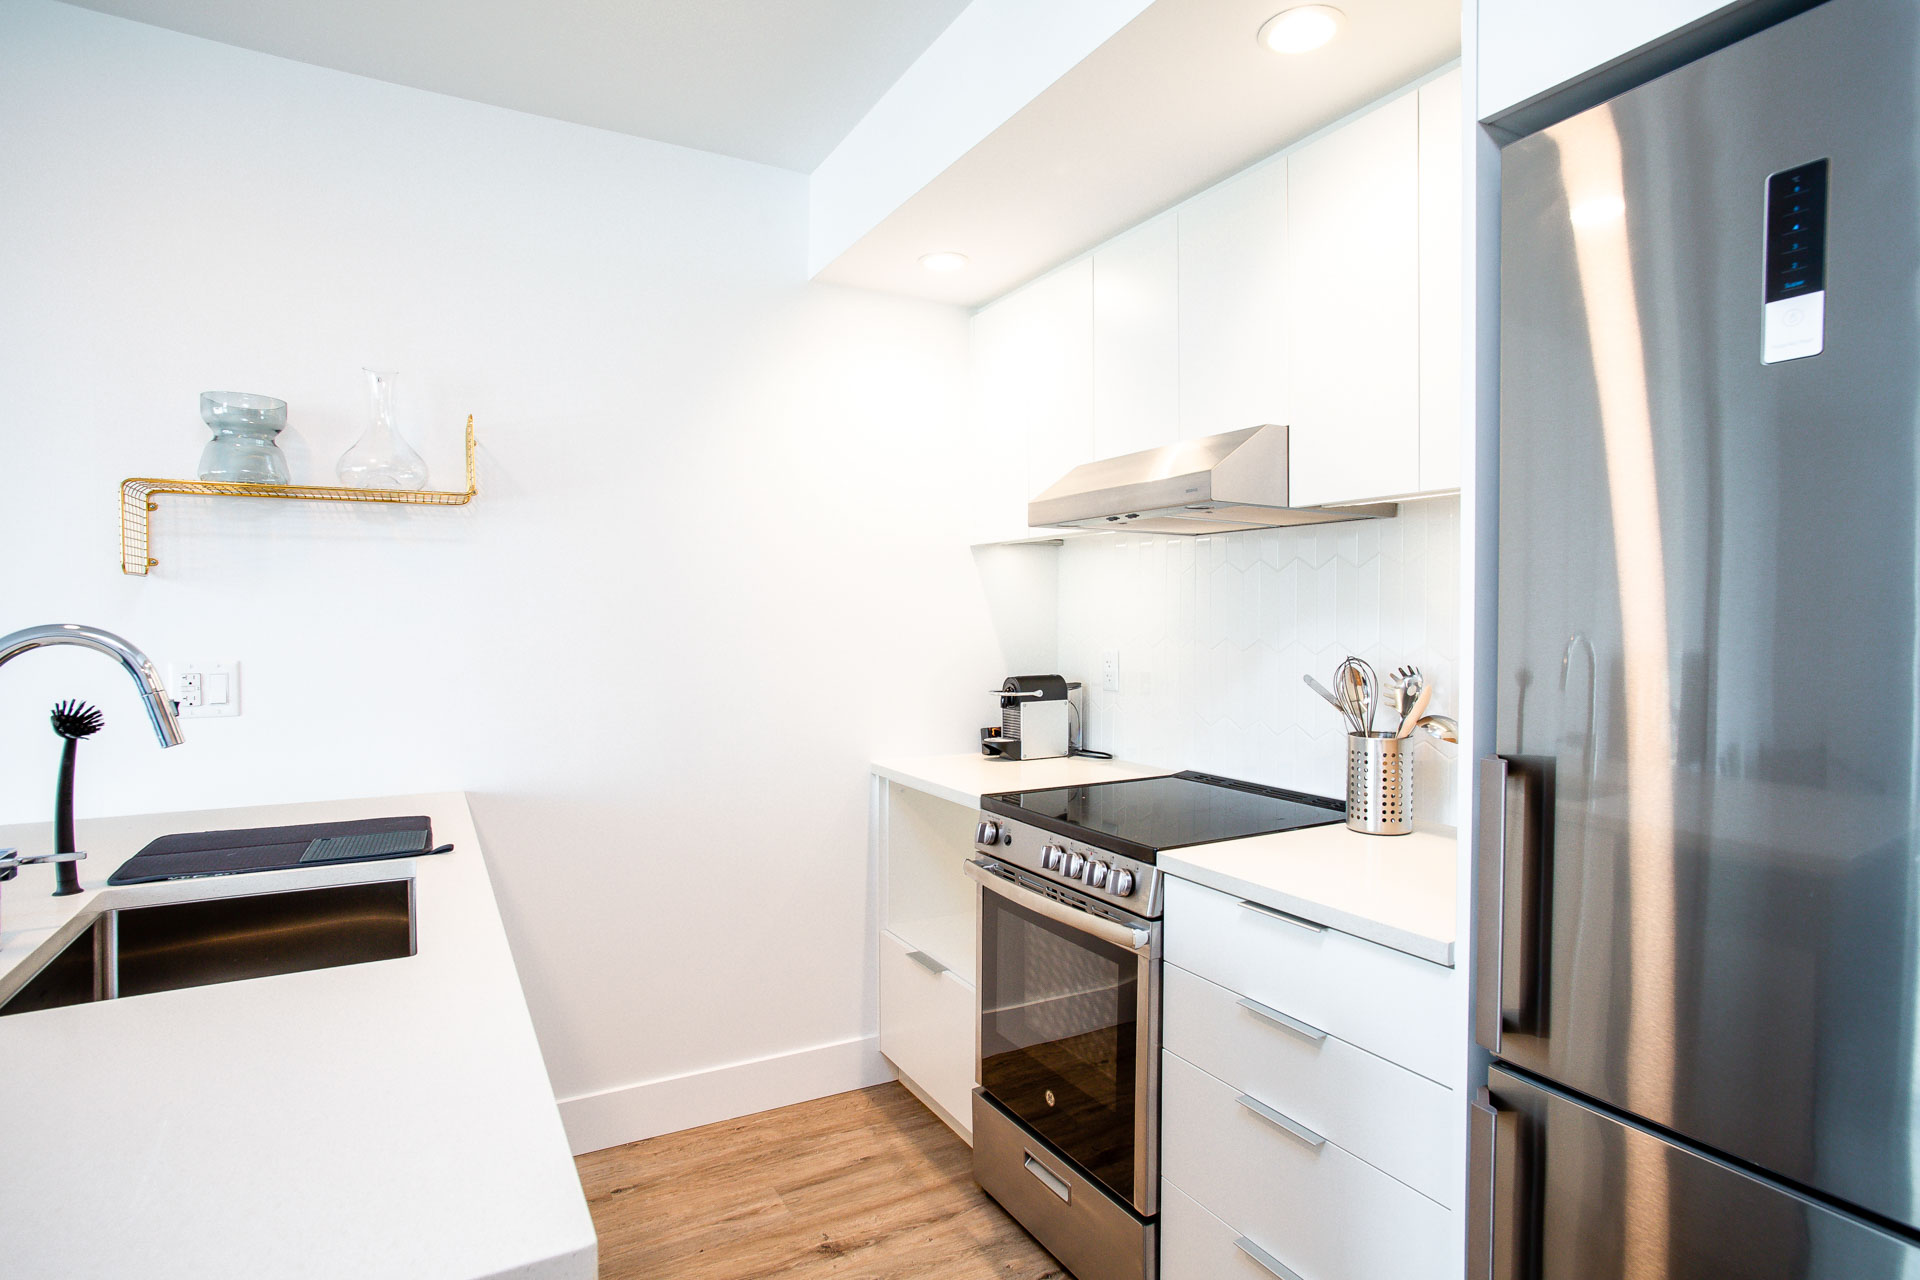 Unit #401 in The Lonsdale Rental Apartments